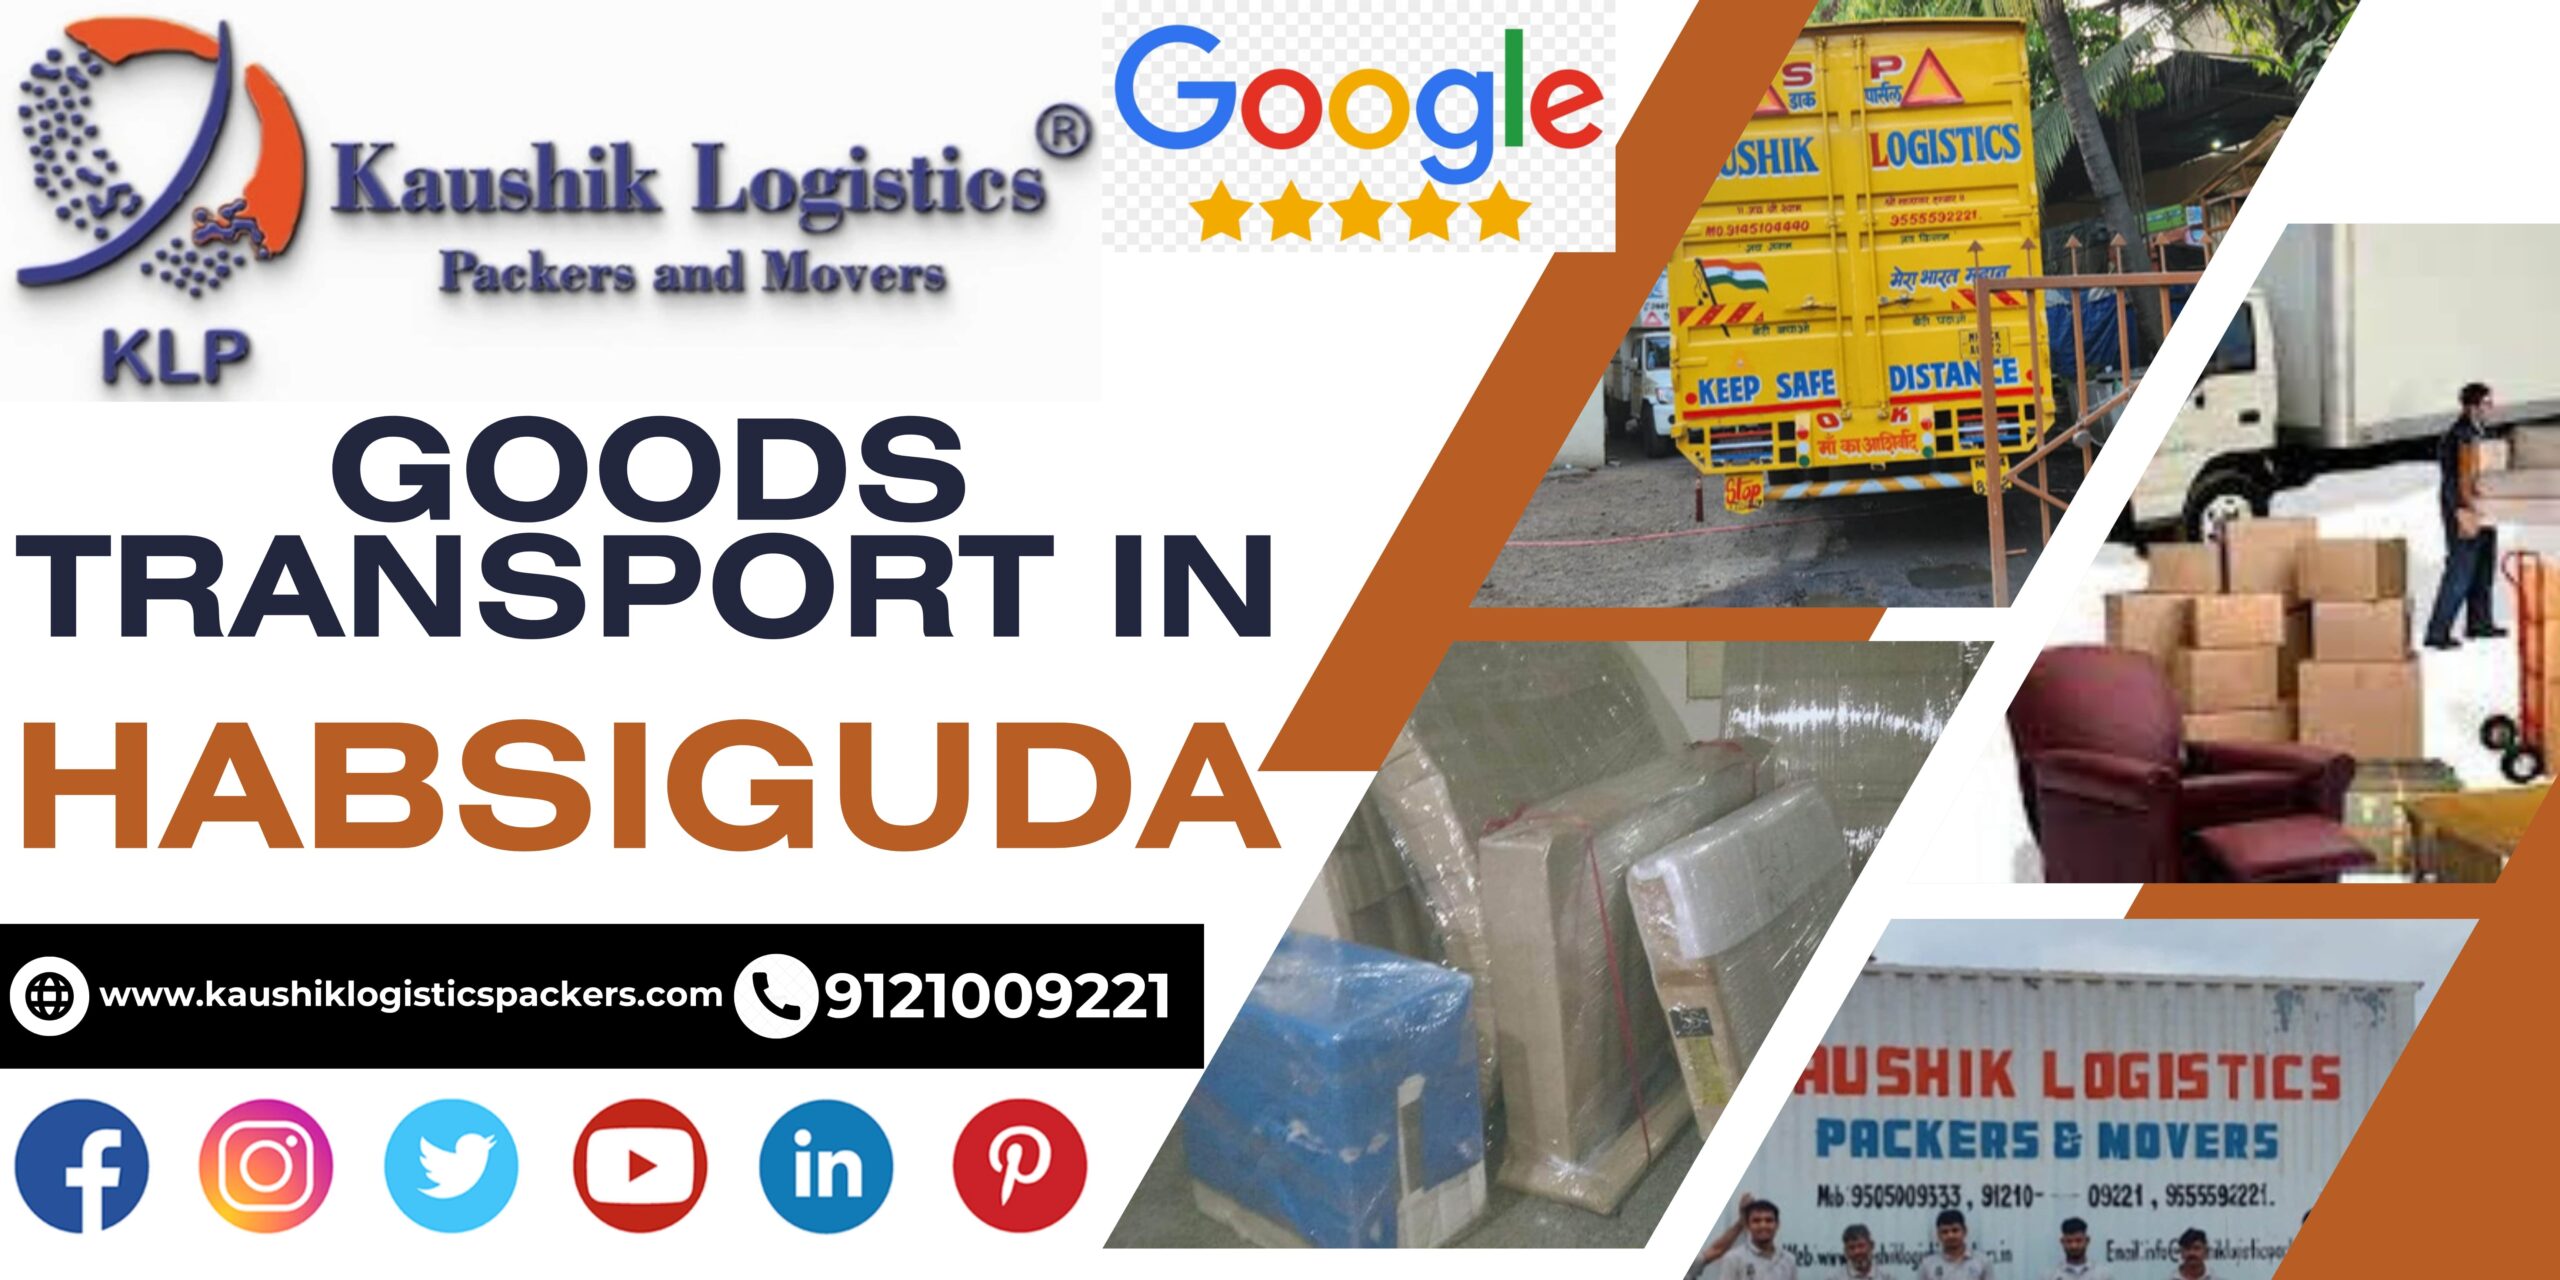 Packers and Movers In Habsiguda